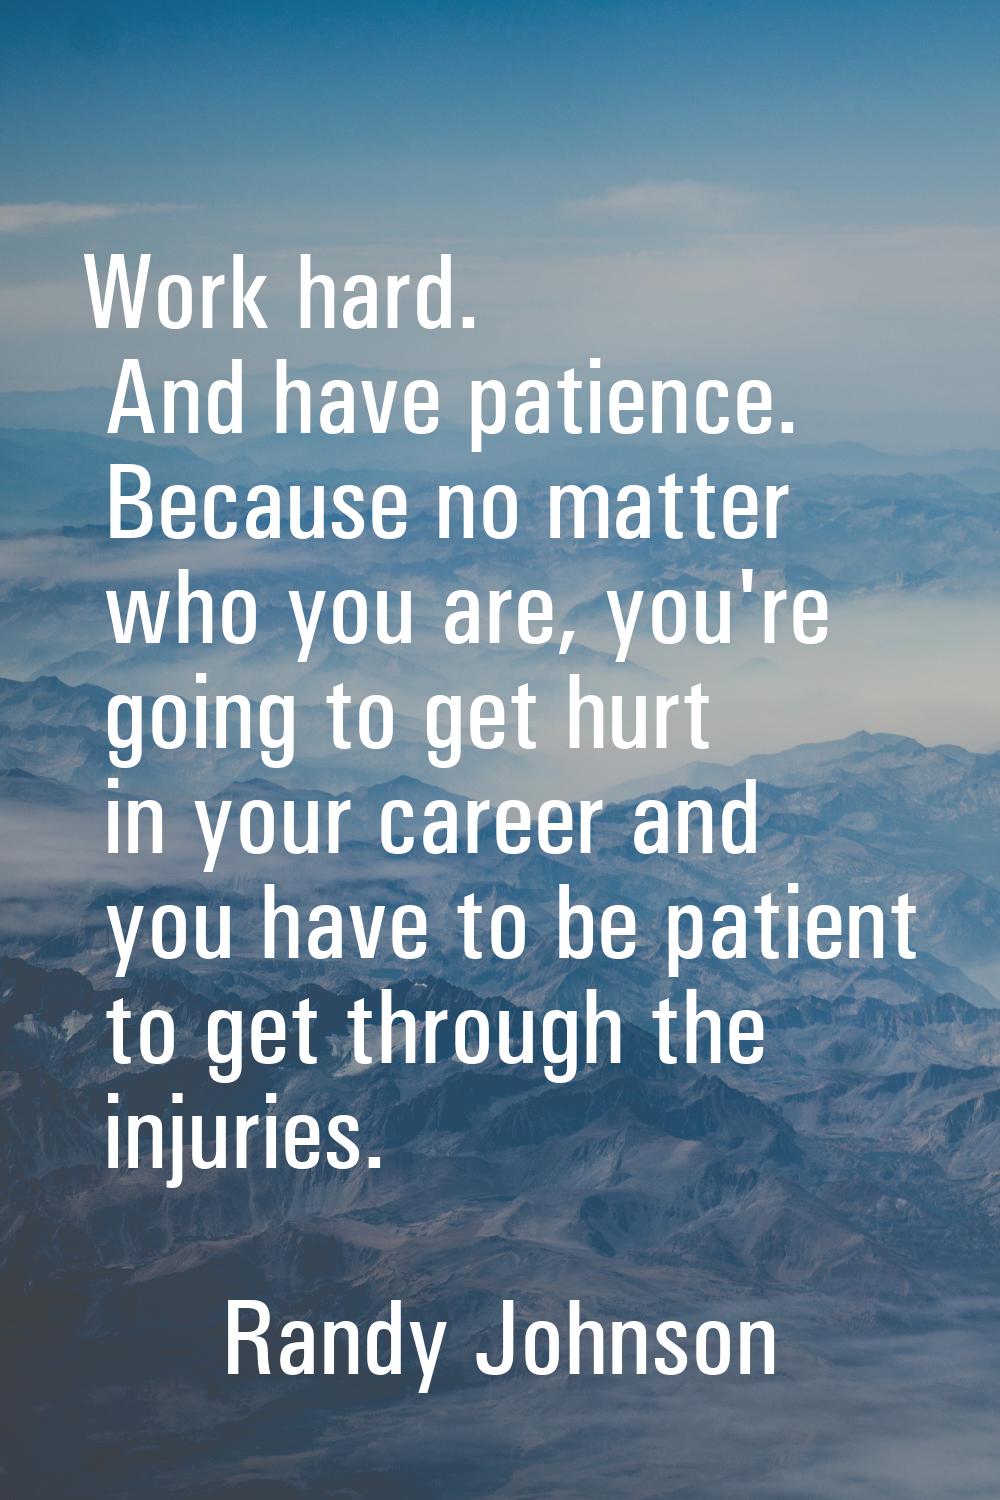 Work hard. And have patience. Because no matter who you are, you're going to get hurt in your caree